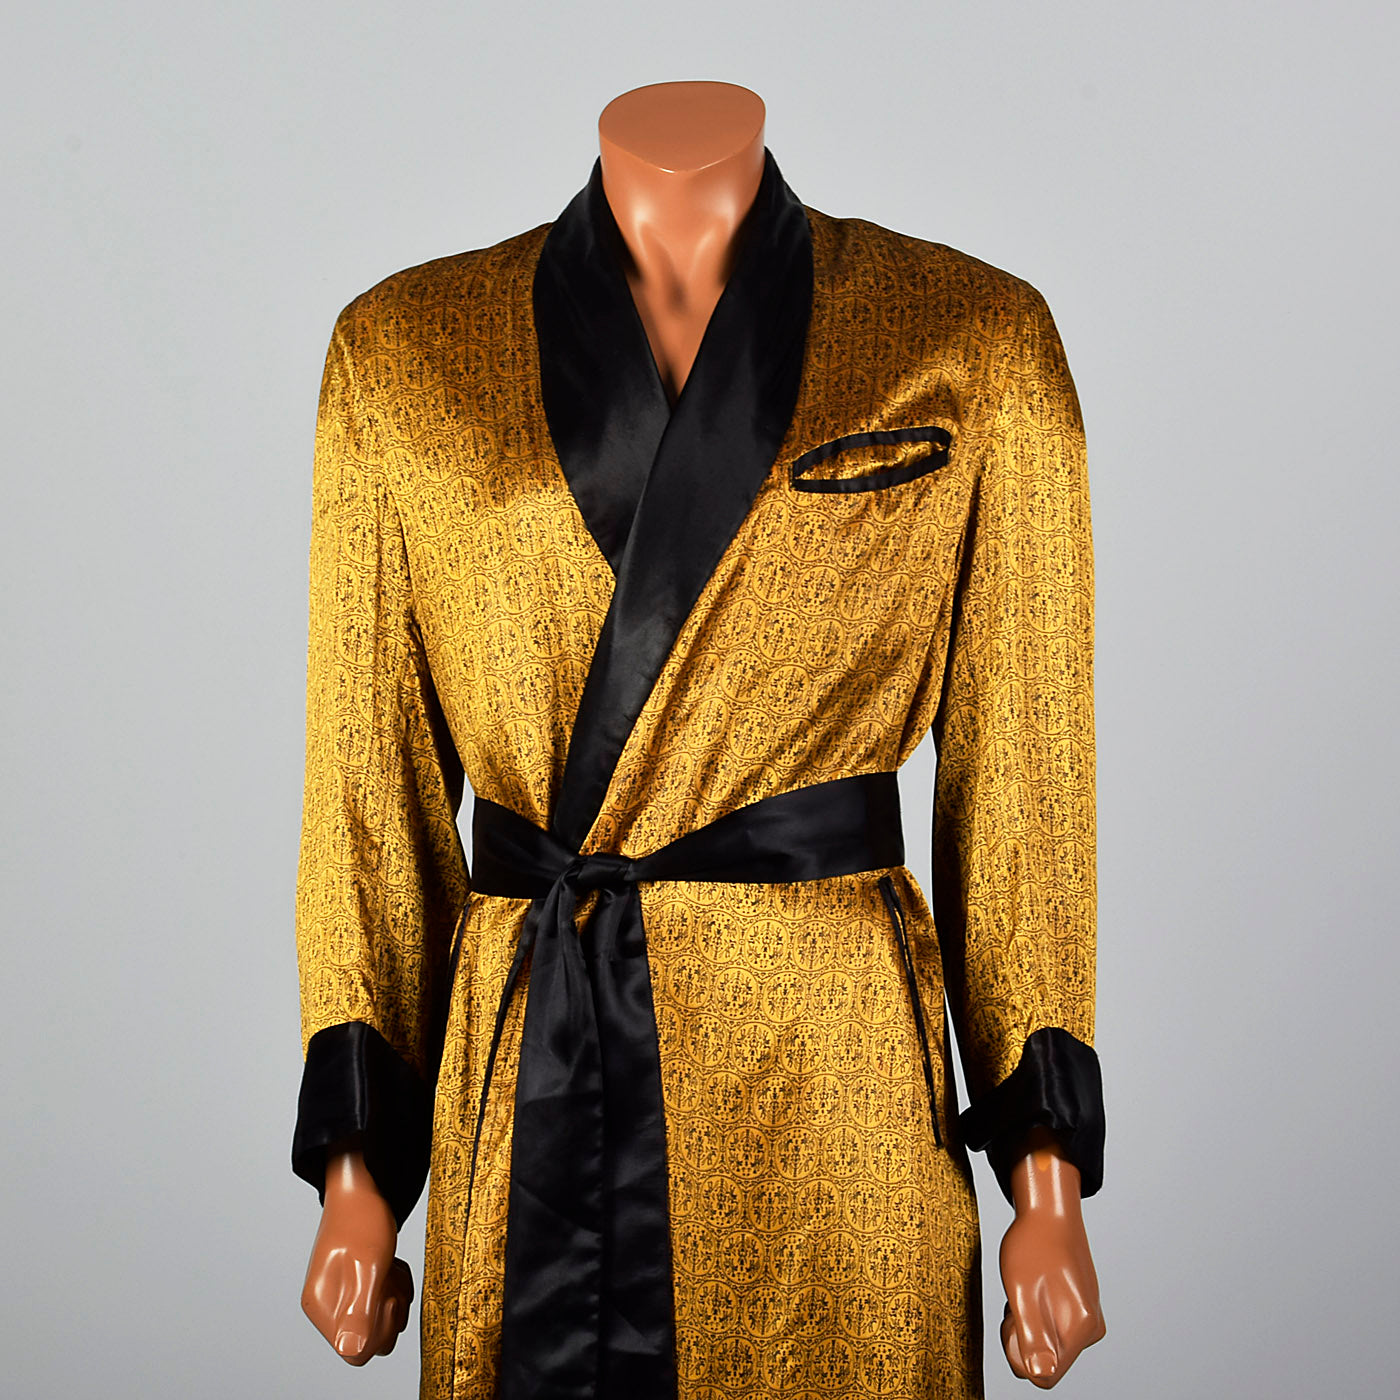 Mens Luxury Robe Gold Housecoat Dressing Gown Vintage Style 